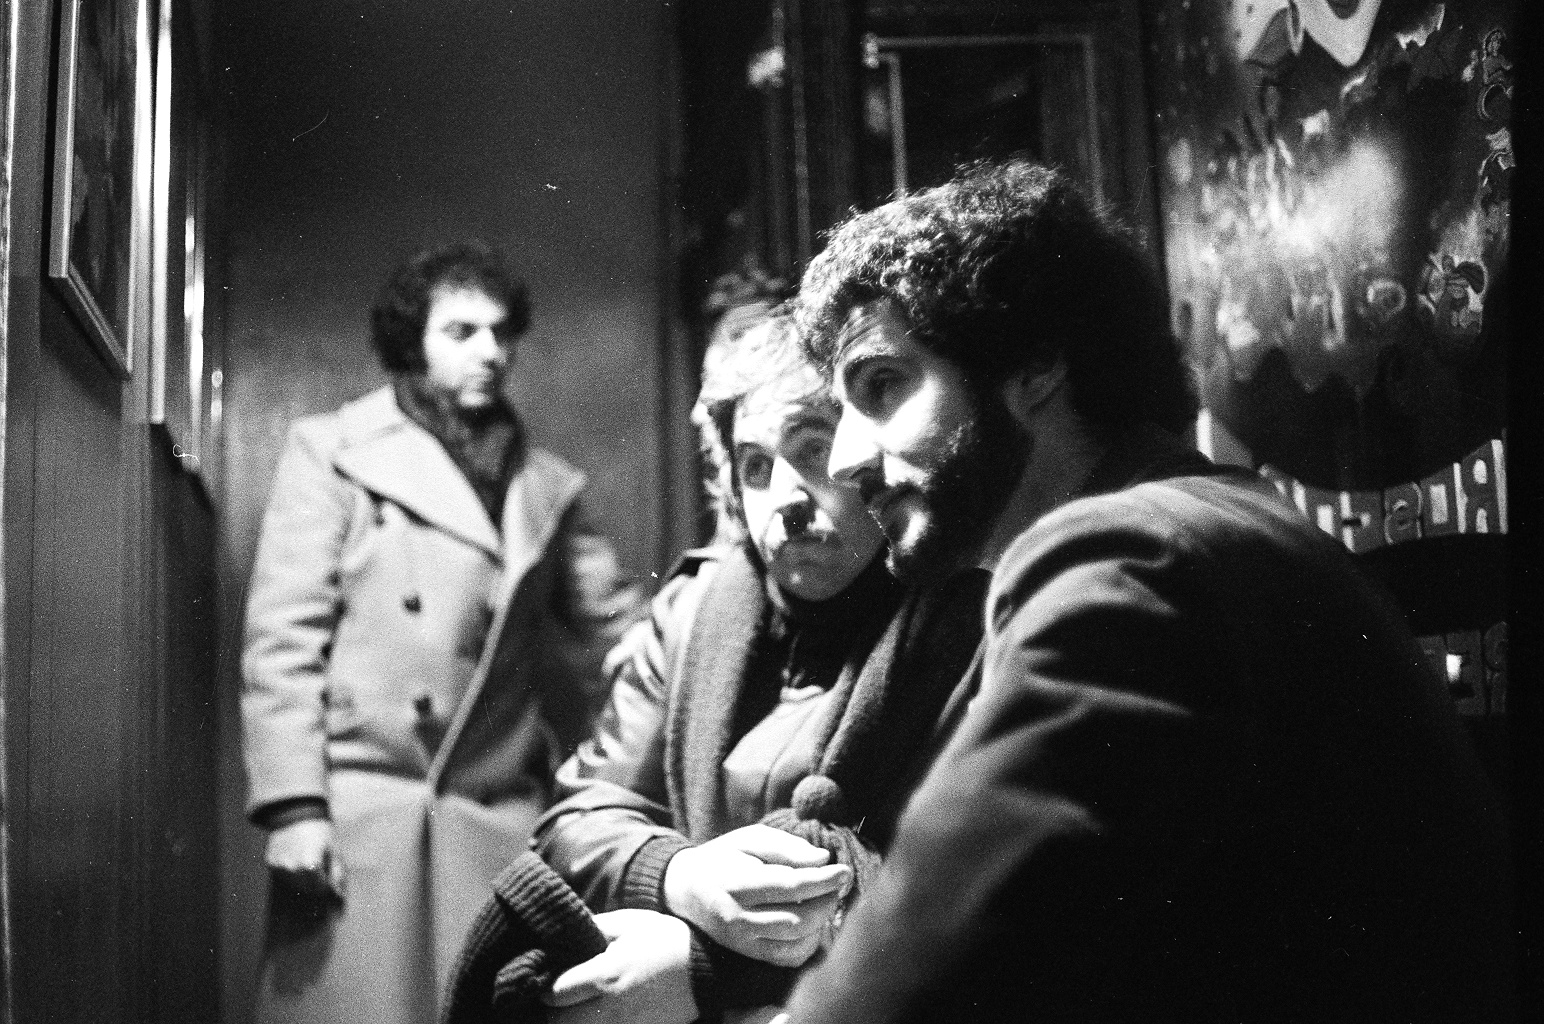 Left to Right Actors Bill Murray, William Reilly and director Jeffrey Wisotsky during a pensive moment on the set of THE FORTUNE TELLER.